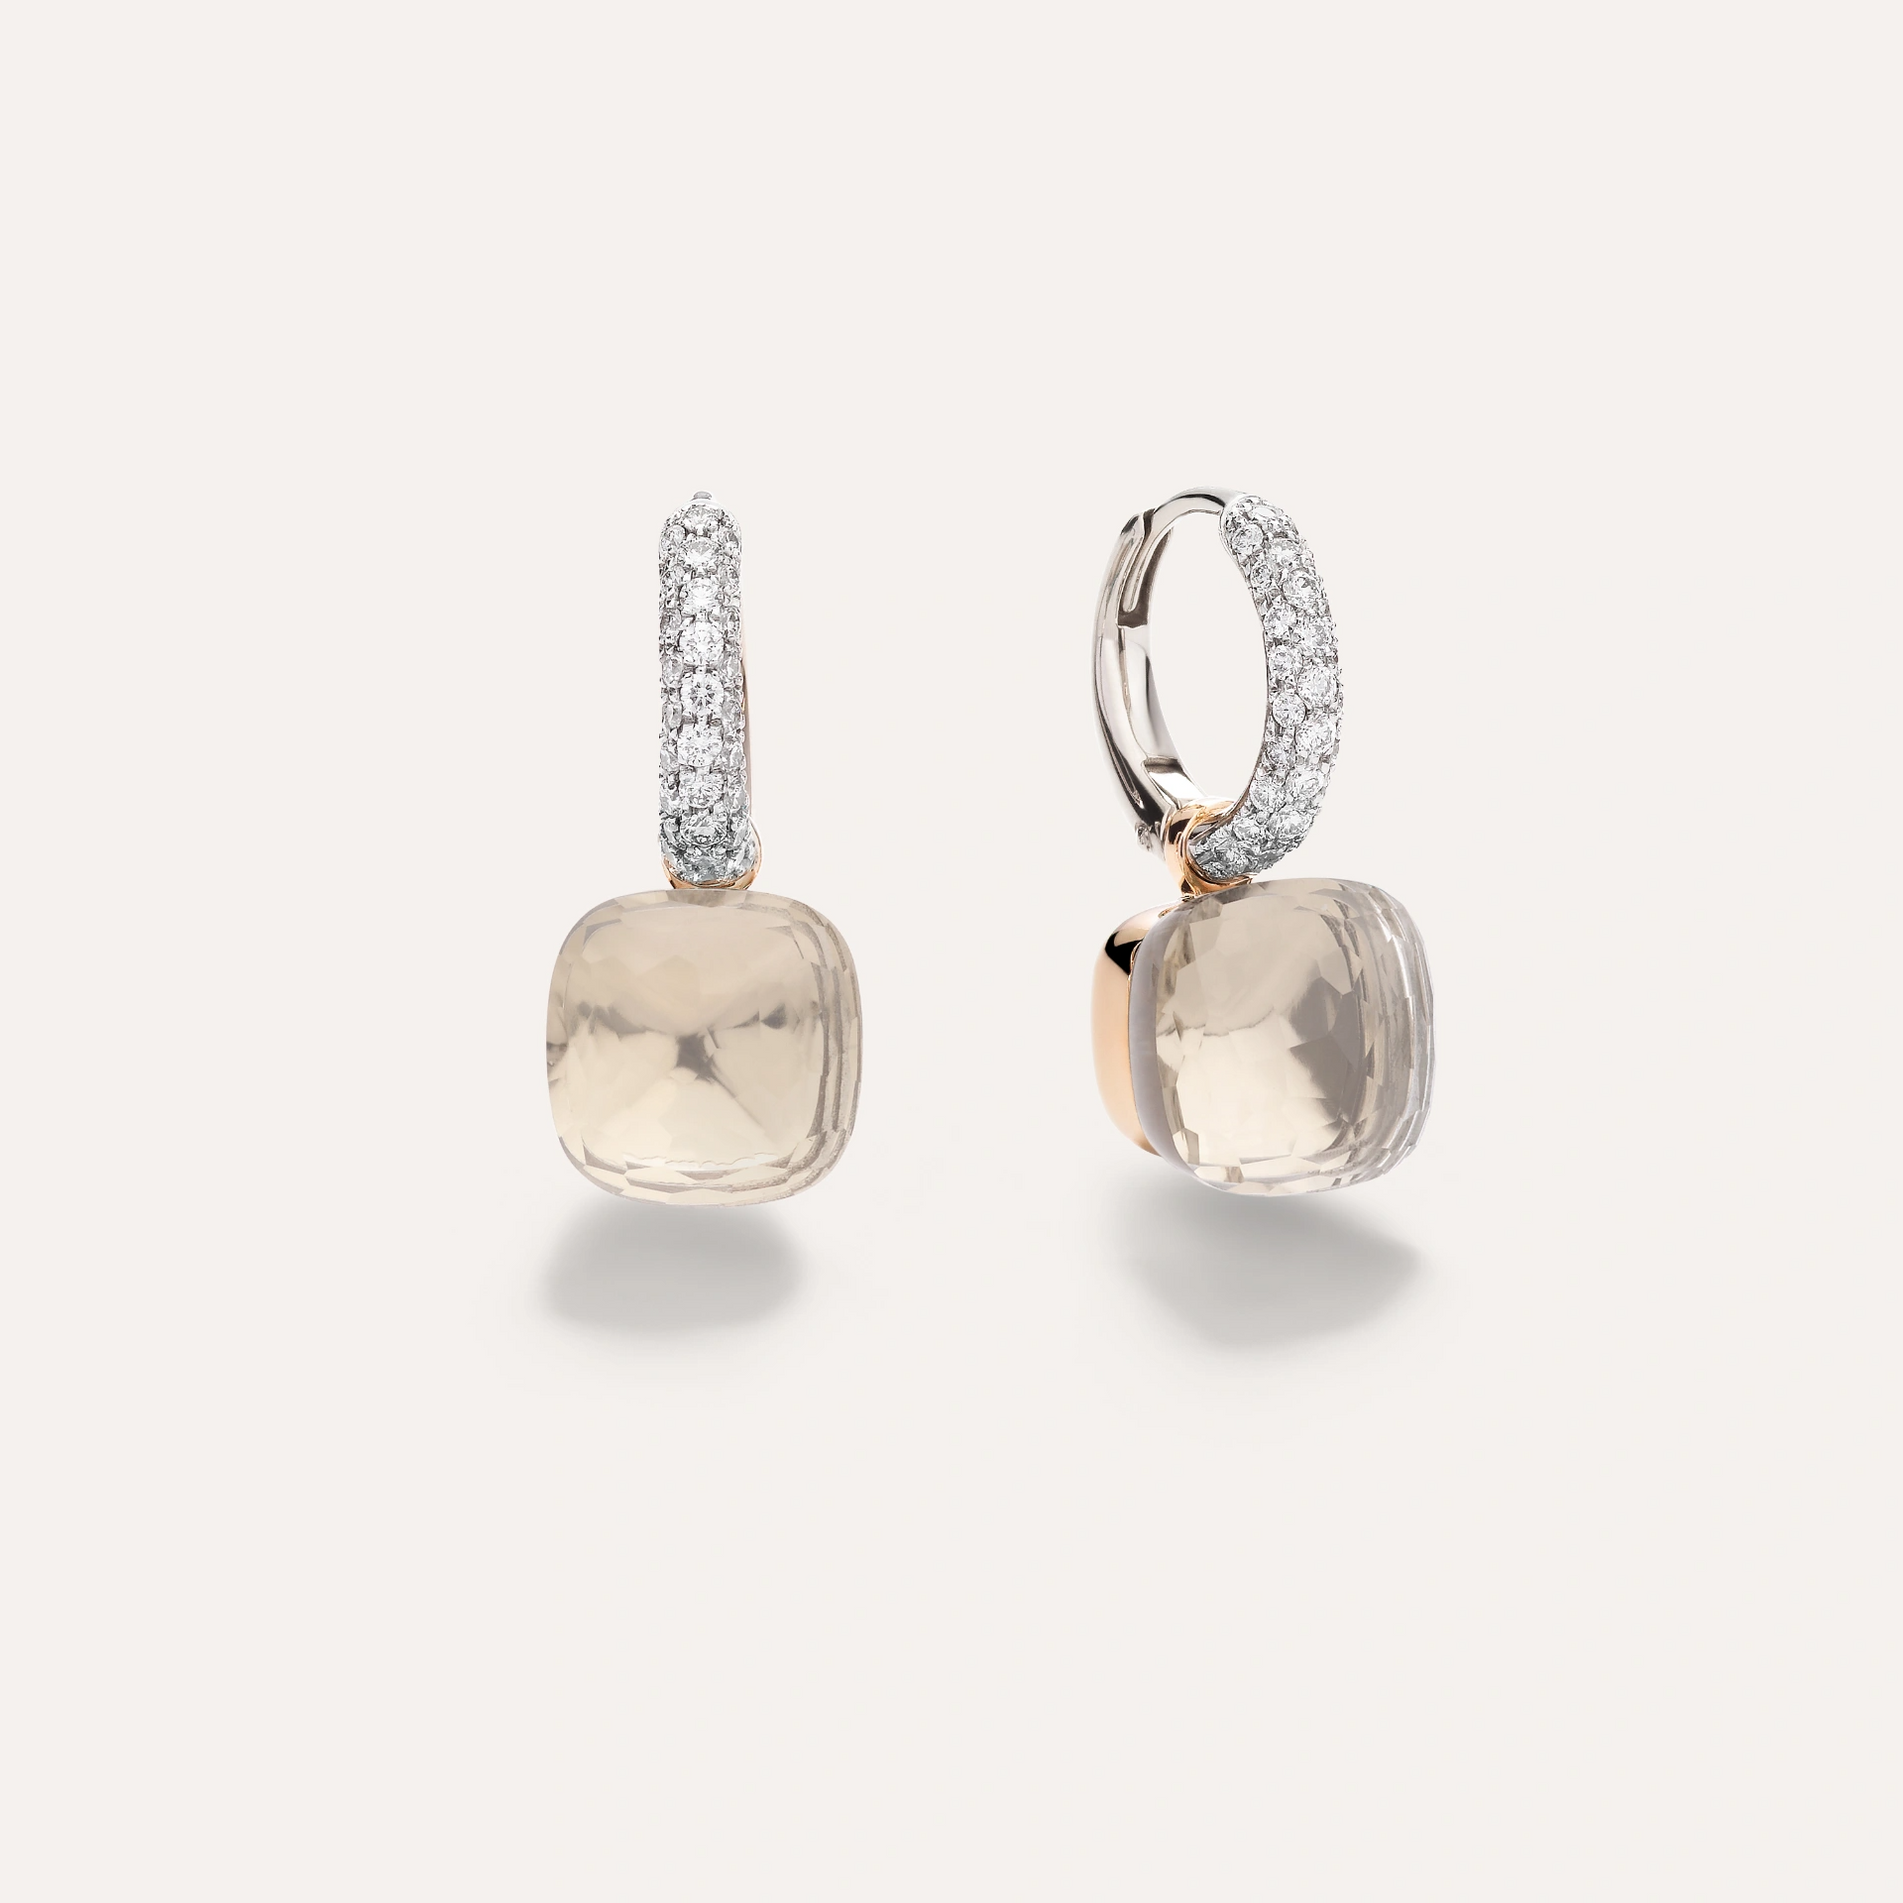 White topaz and diamond drop earring from the pomellato nudo collection set in rose and white gold